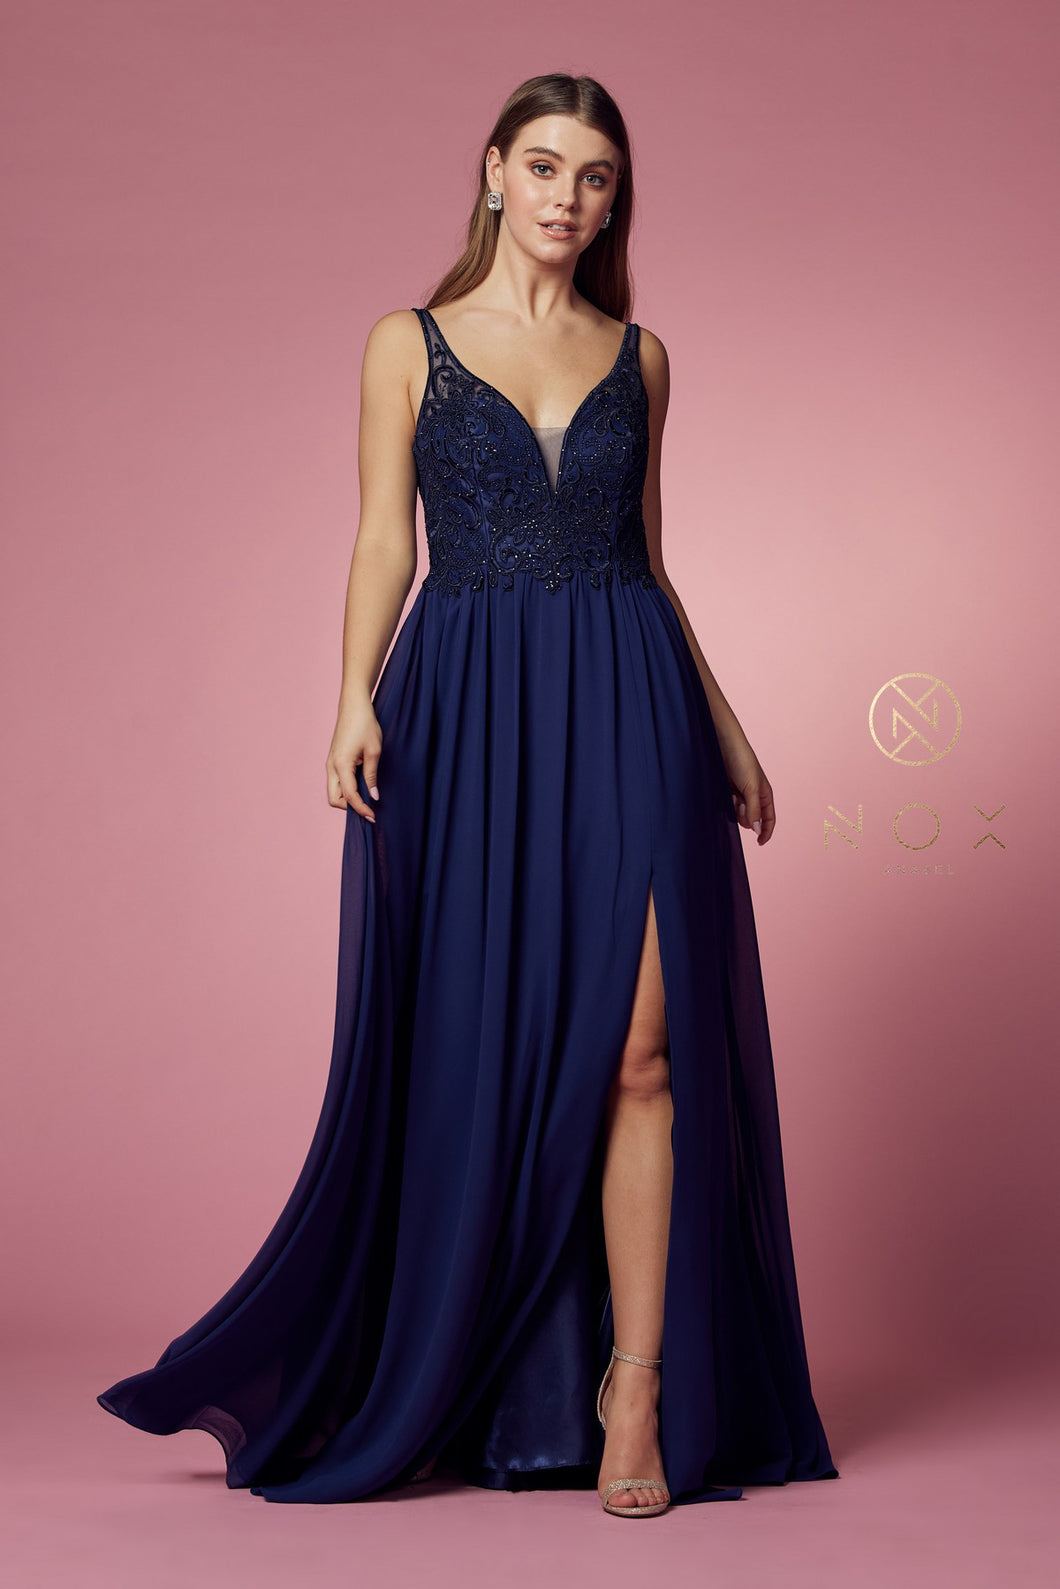 N Y299 - A-Line Prom Gown with Beaded Lace Bodice Leg Slit & Flowy Chiffon Skirt PROM GOWN Nox XS NAVY 